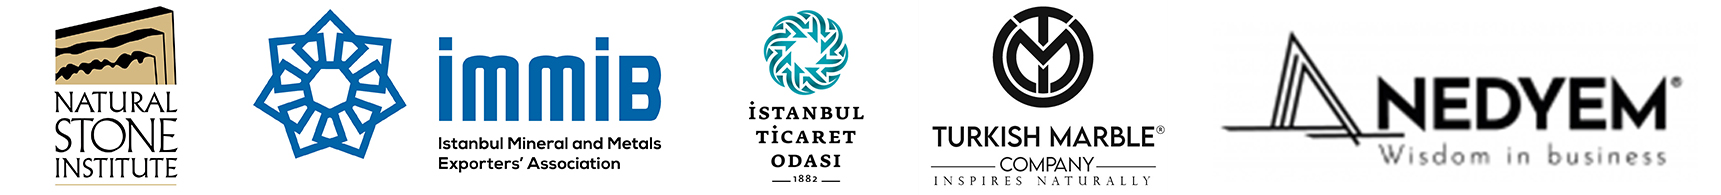 turkishmarblecompany reference